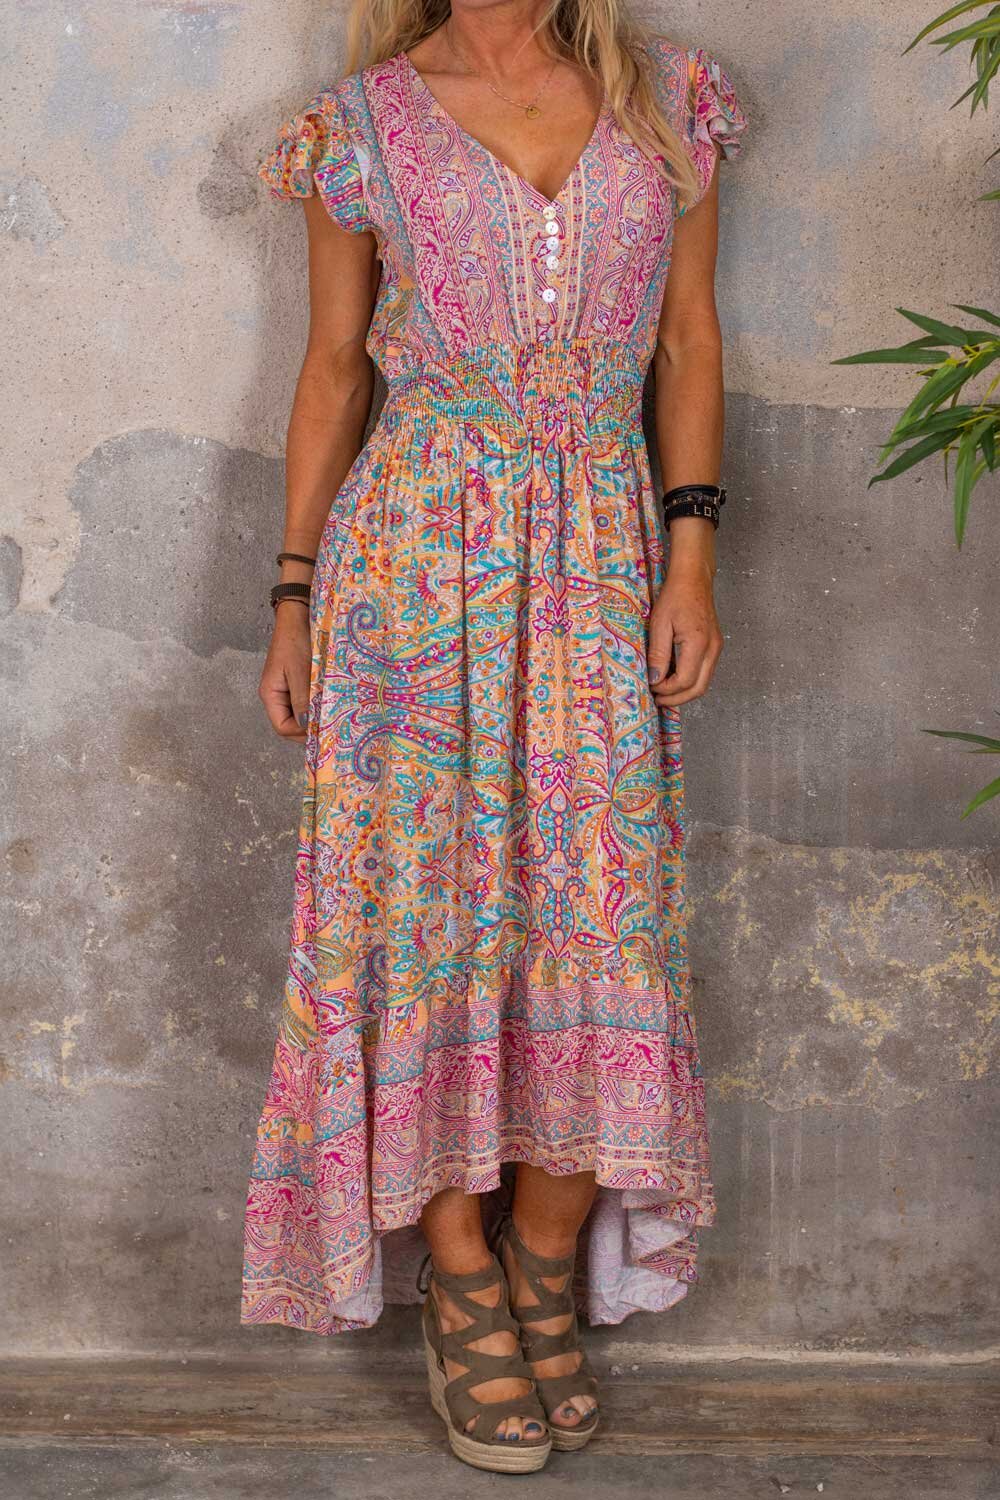 Victoria long dress - Patterned - Pink